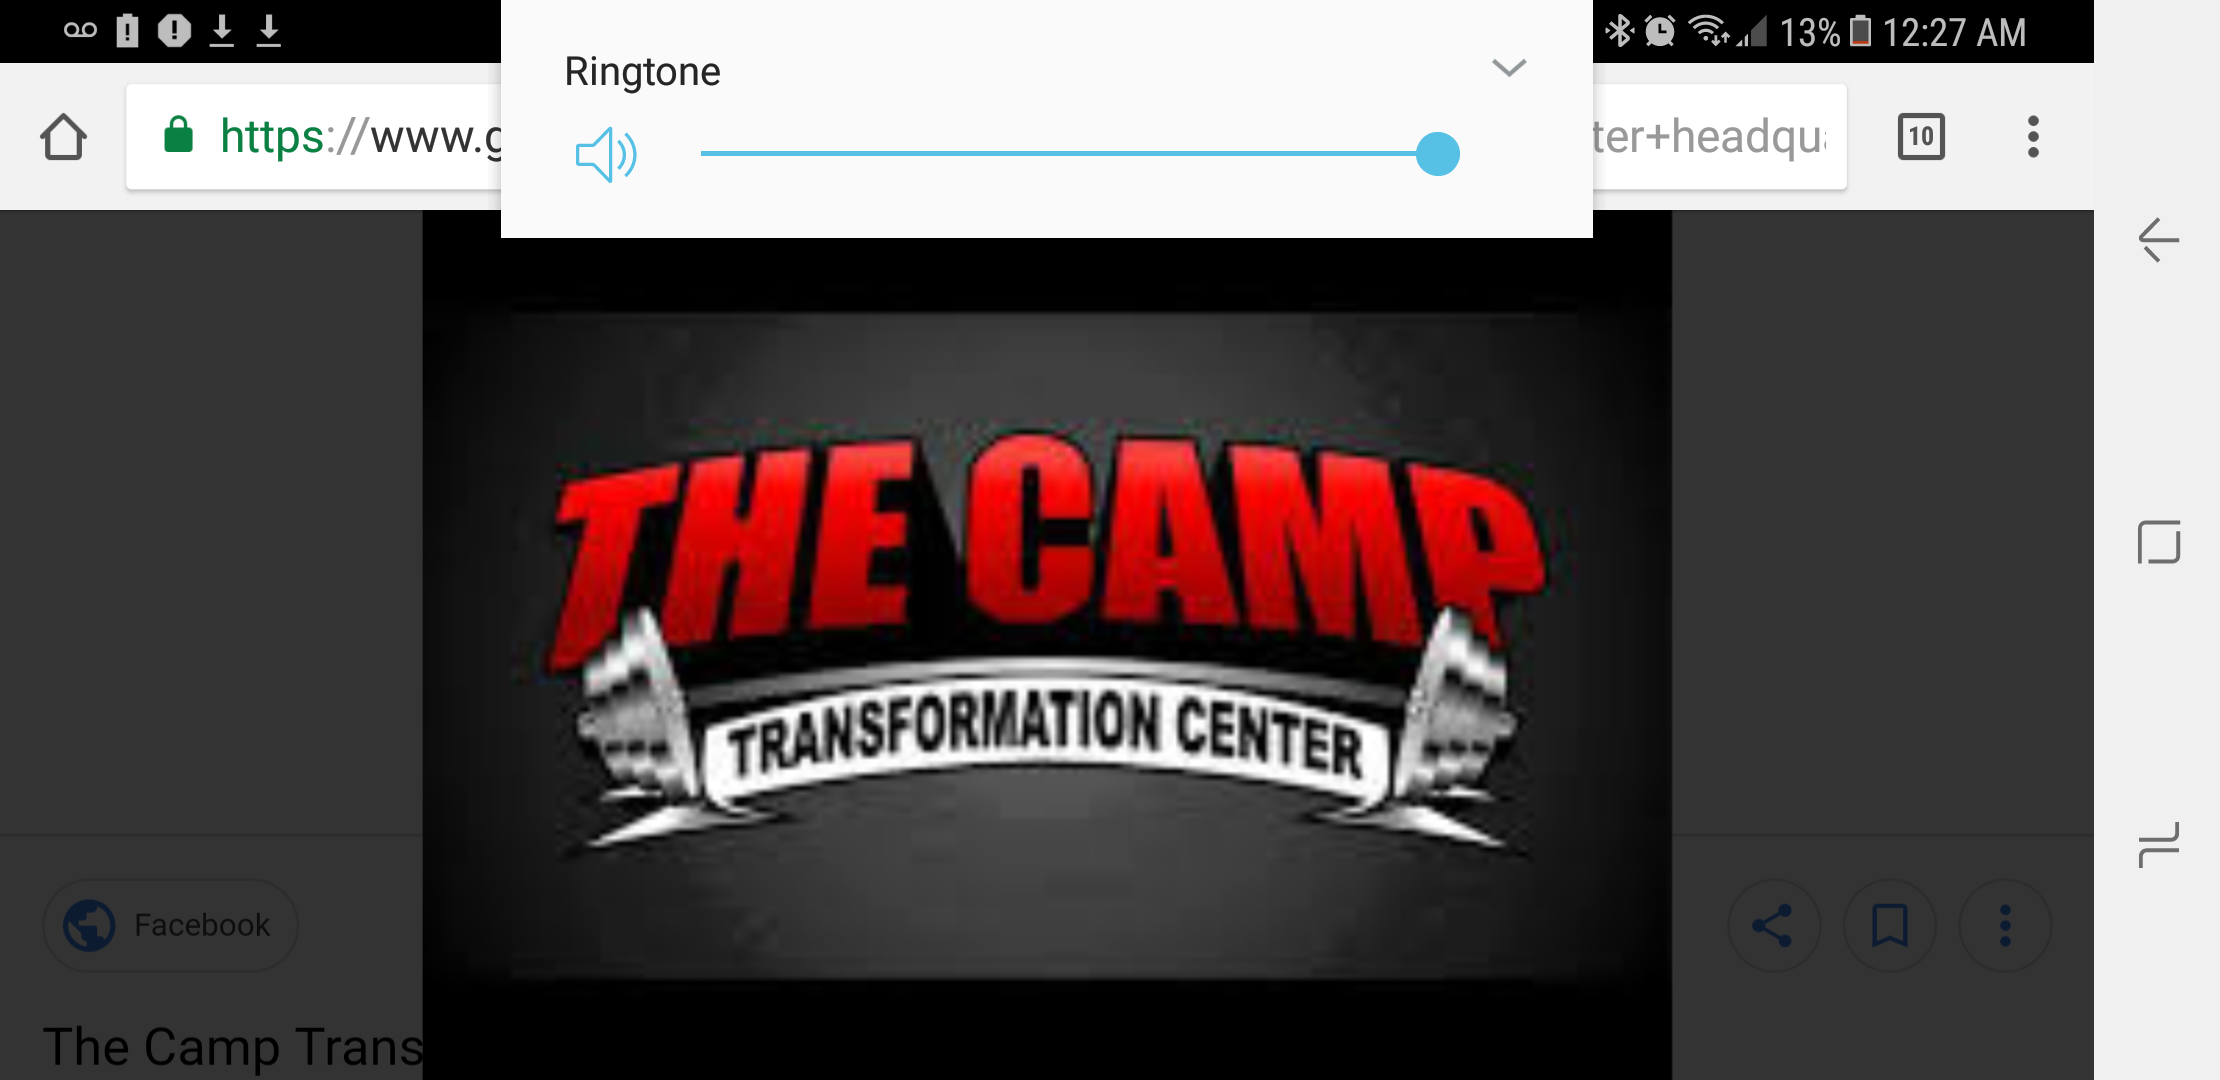 The camp Transformation Center rip off